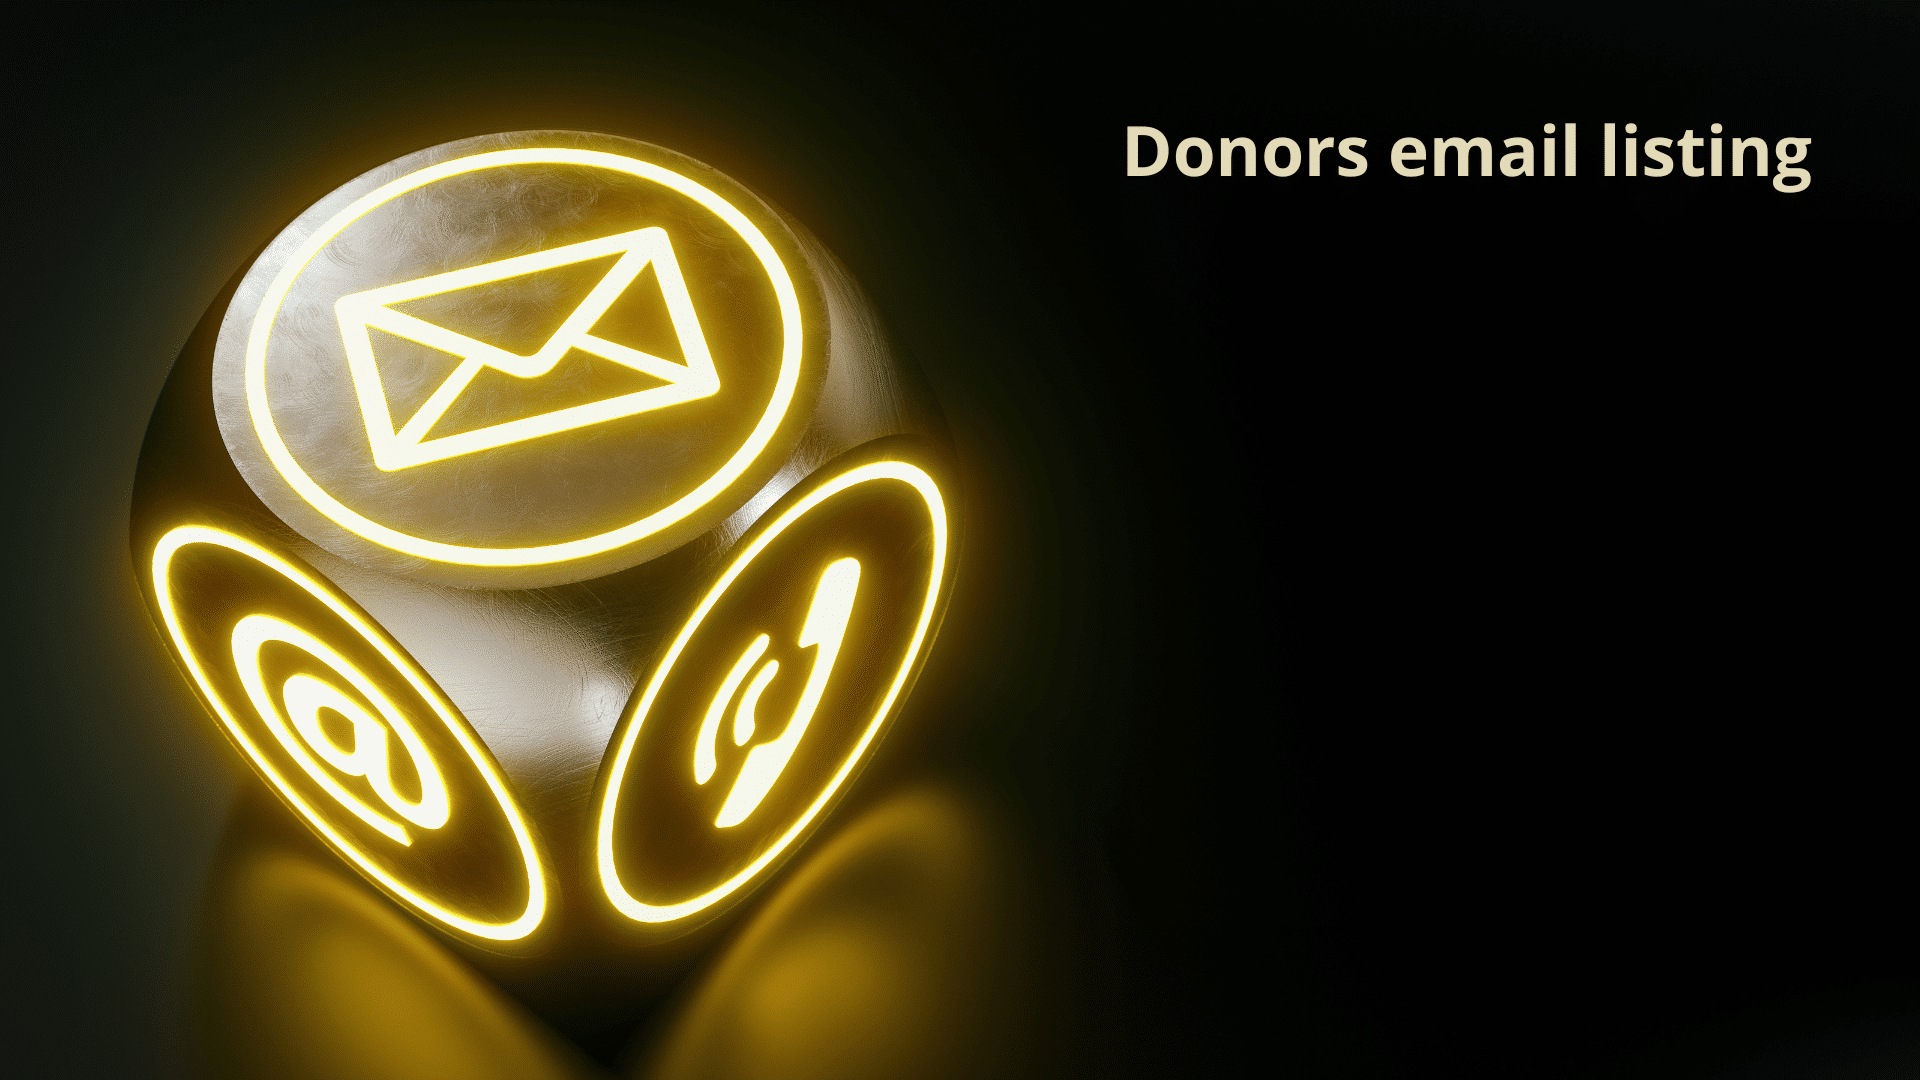 Donors email listing